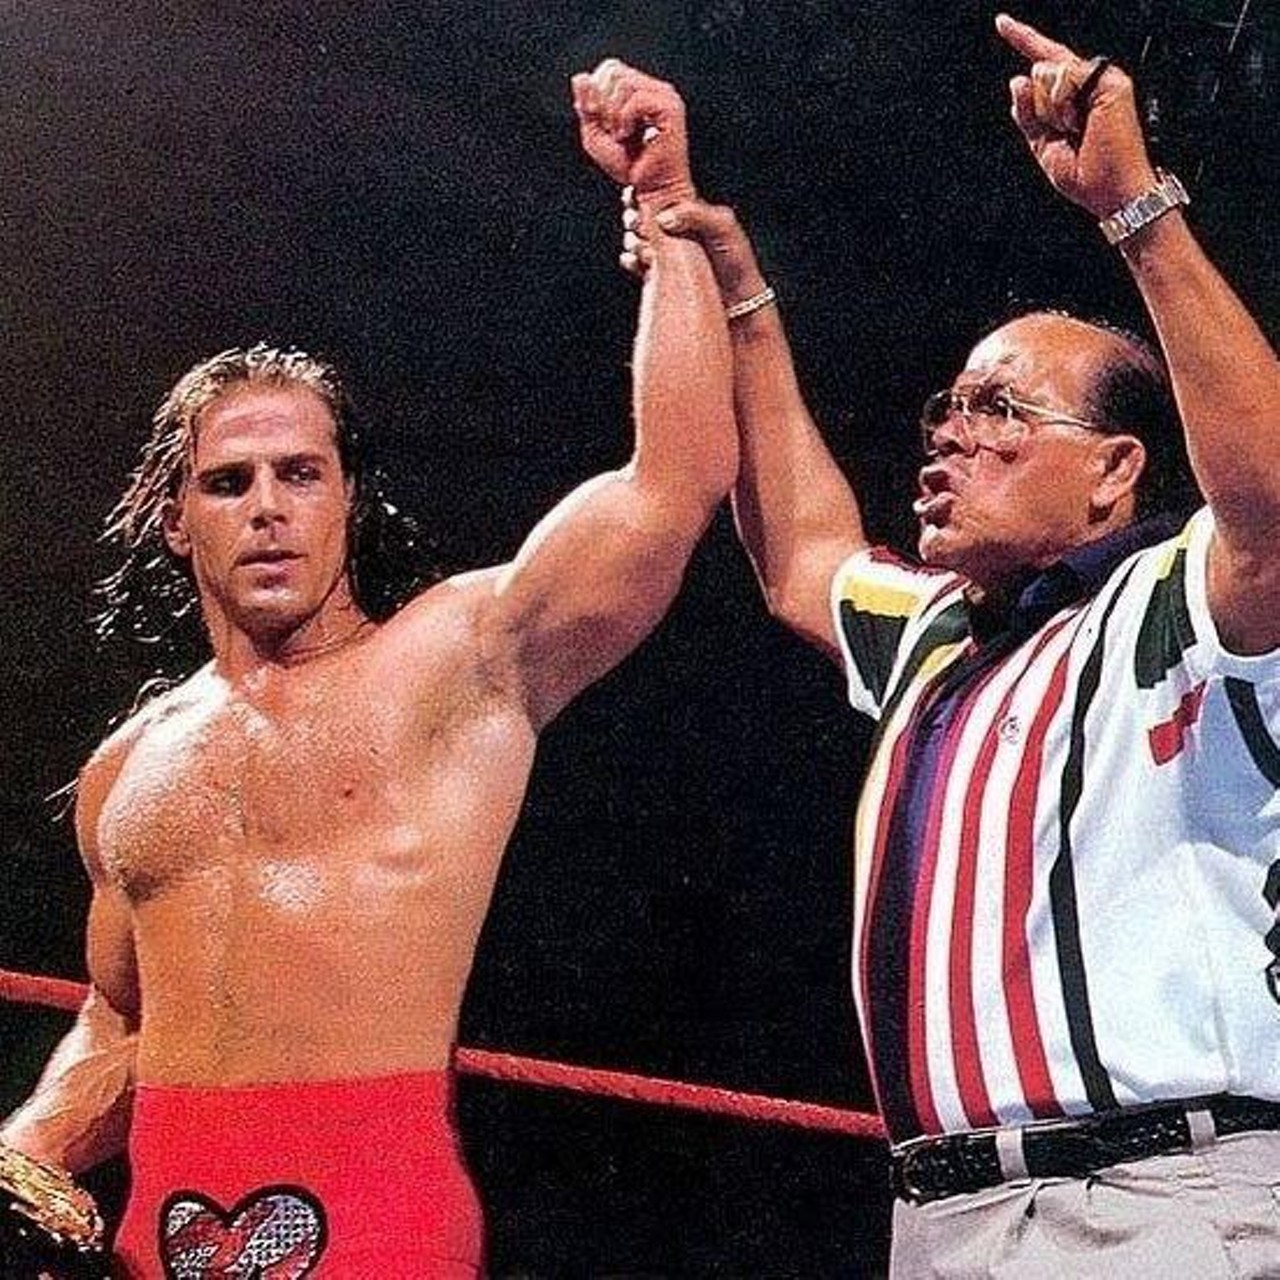 Shawn Michaels
Though he was born in Arizona, Shawn Michaels’ ties to SA make him the prodigal son of the Alamo City. No, not really, but we do rep him since he attended Randolph HS on base. He would later be trained by local, yet acclaimed boxing legend José Lothario.
Photo courtesy of WWE